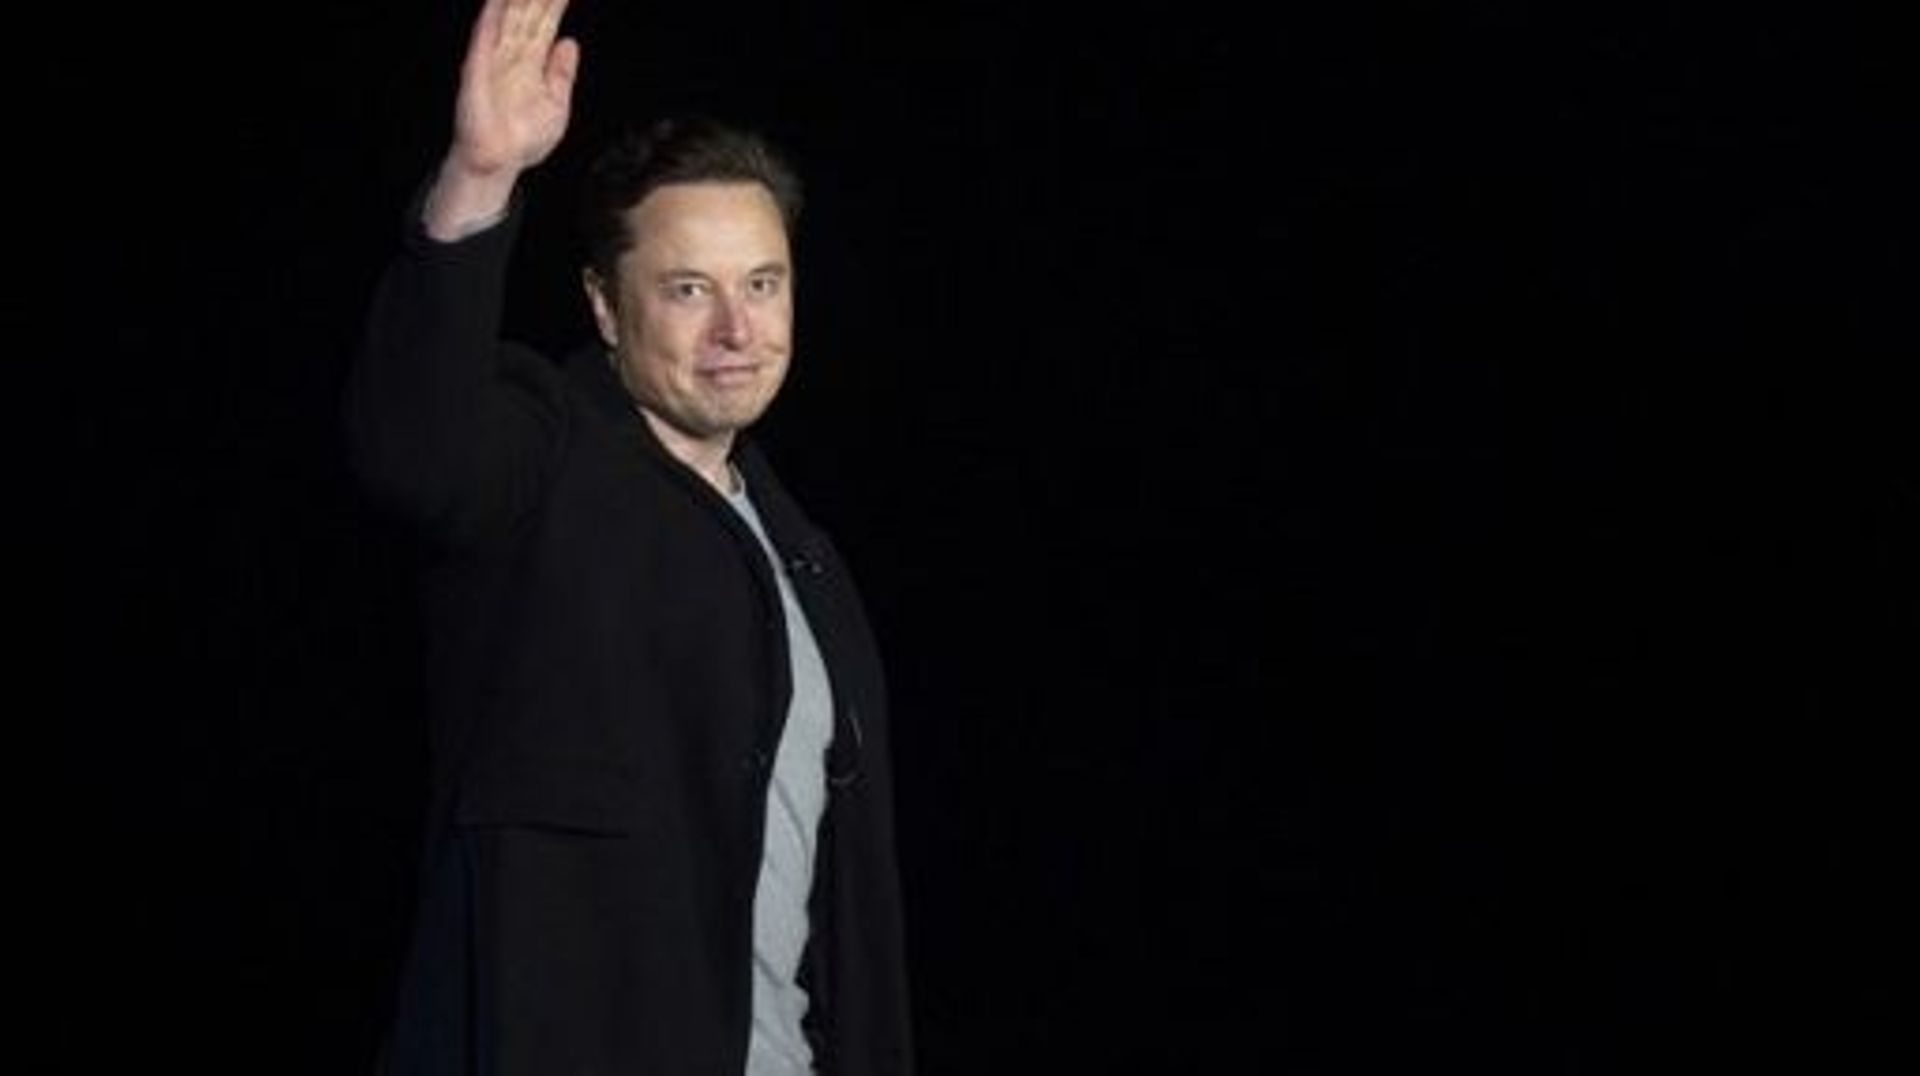 (FILES) In this file photo taken on February 10, 2022 Elon Musk gestures as he speaks during a press conference at SpaceX's Starbase facility near Boca Chica Village in South Texas. Elon Musk late Tuesday said he will resign as chief executive of Twitter 